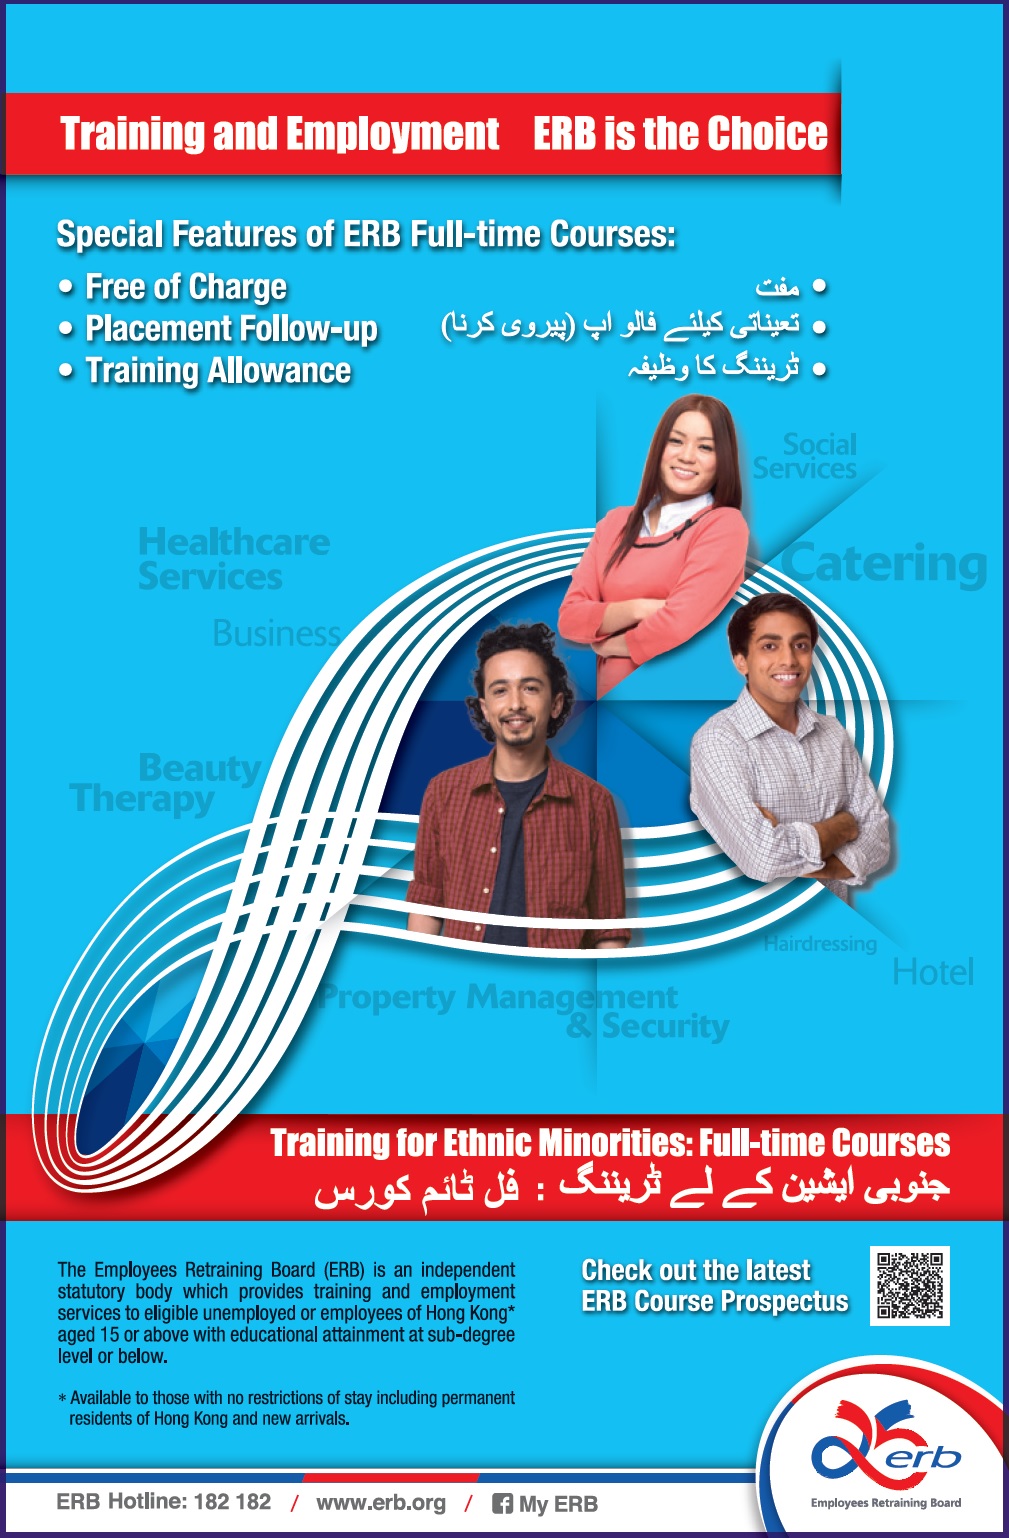 Click here to download the image version of newspaper advertisement of Training for Ethnic Minorities (November 2017) (Urdu)